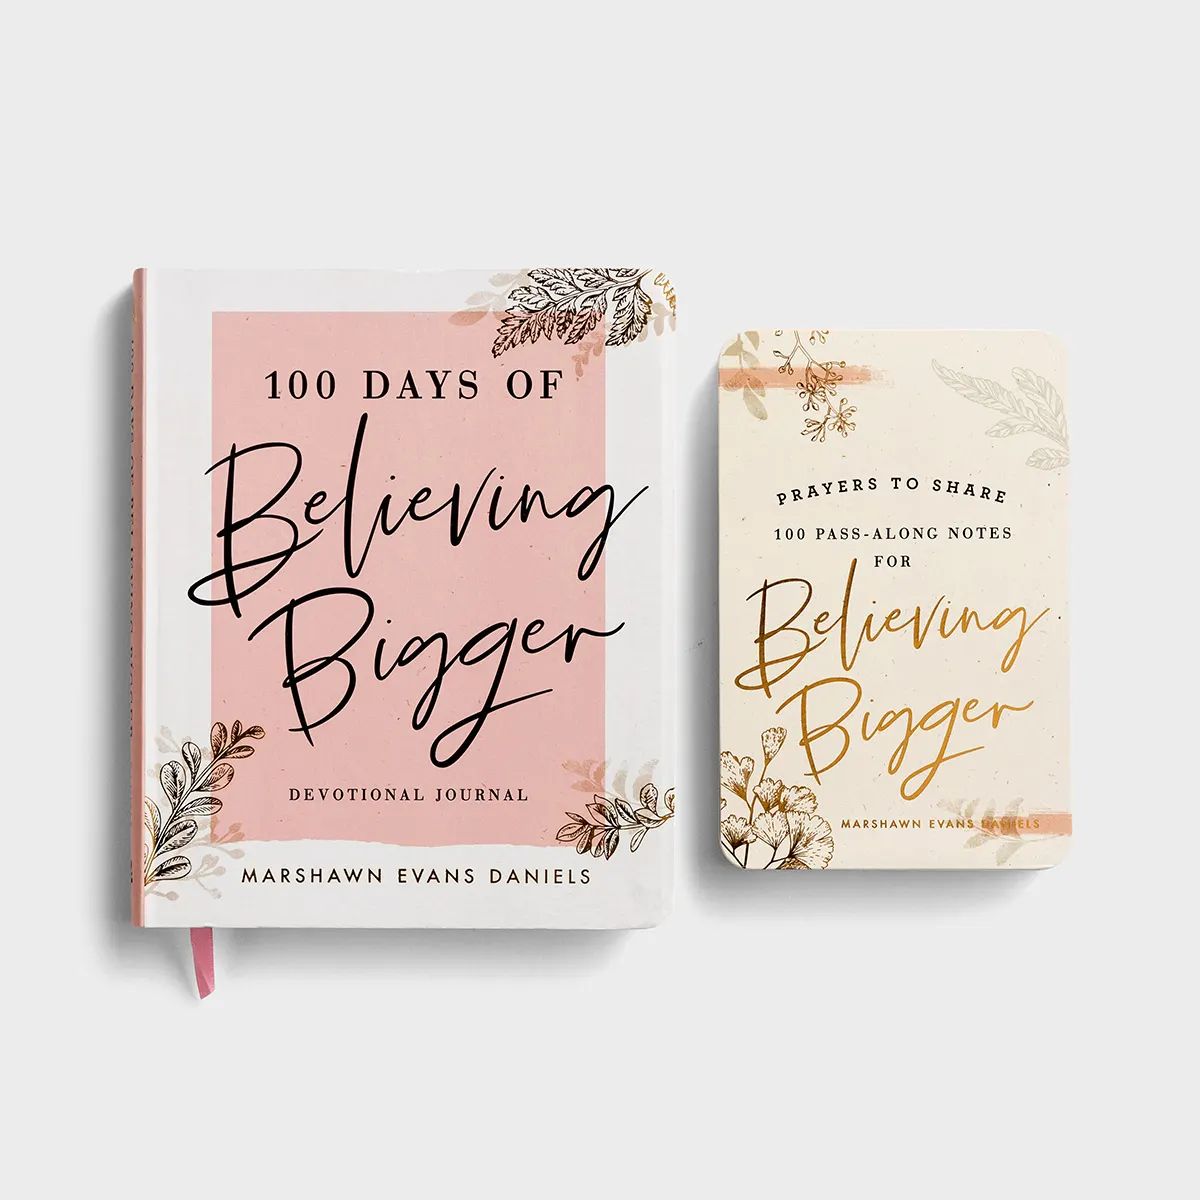 Marshawn Evans Daniels - 100 Days of Believing Bigger - Devotional Journal and Prayers to Share S... | DaySpring